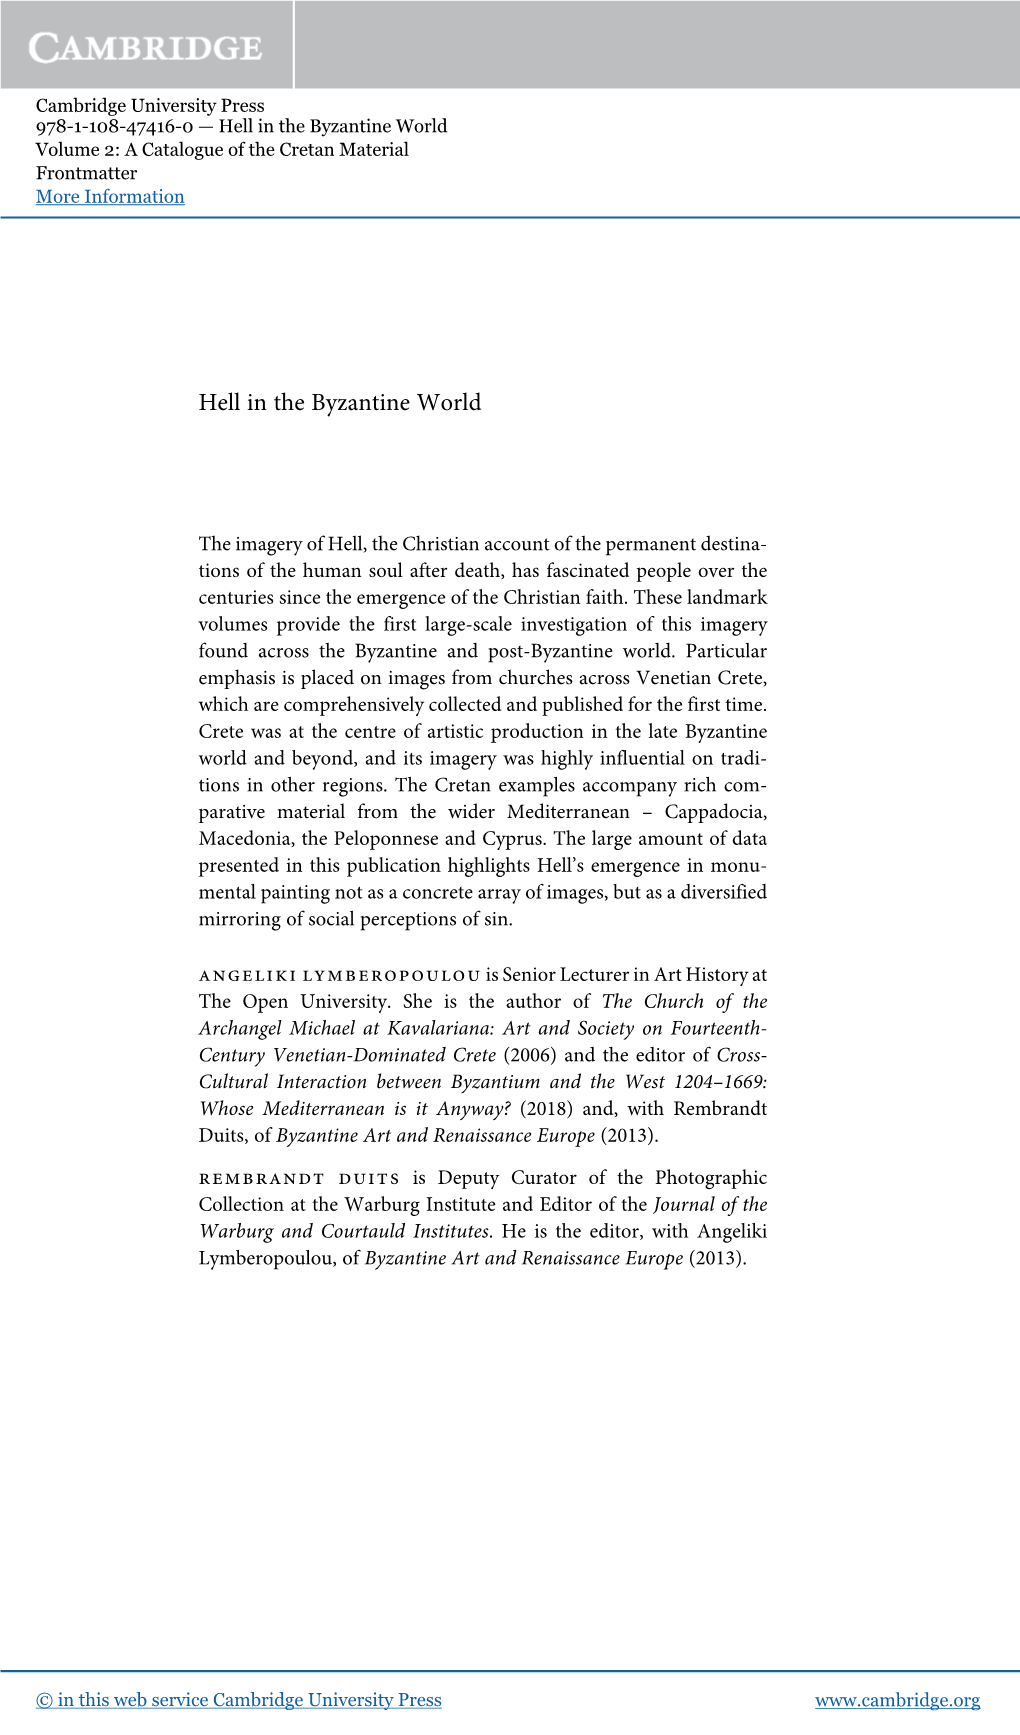 Hell in the Byzantine World Volume 2: a Catalogue of the Cretan Material Frontmatter More Information